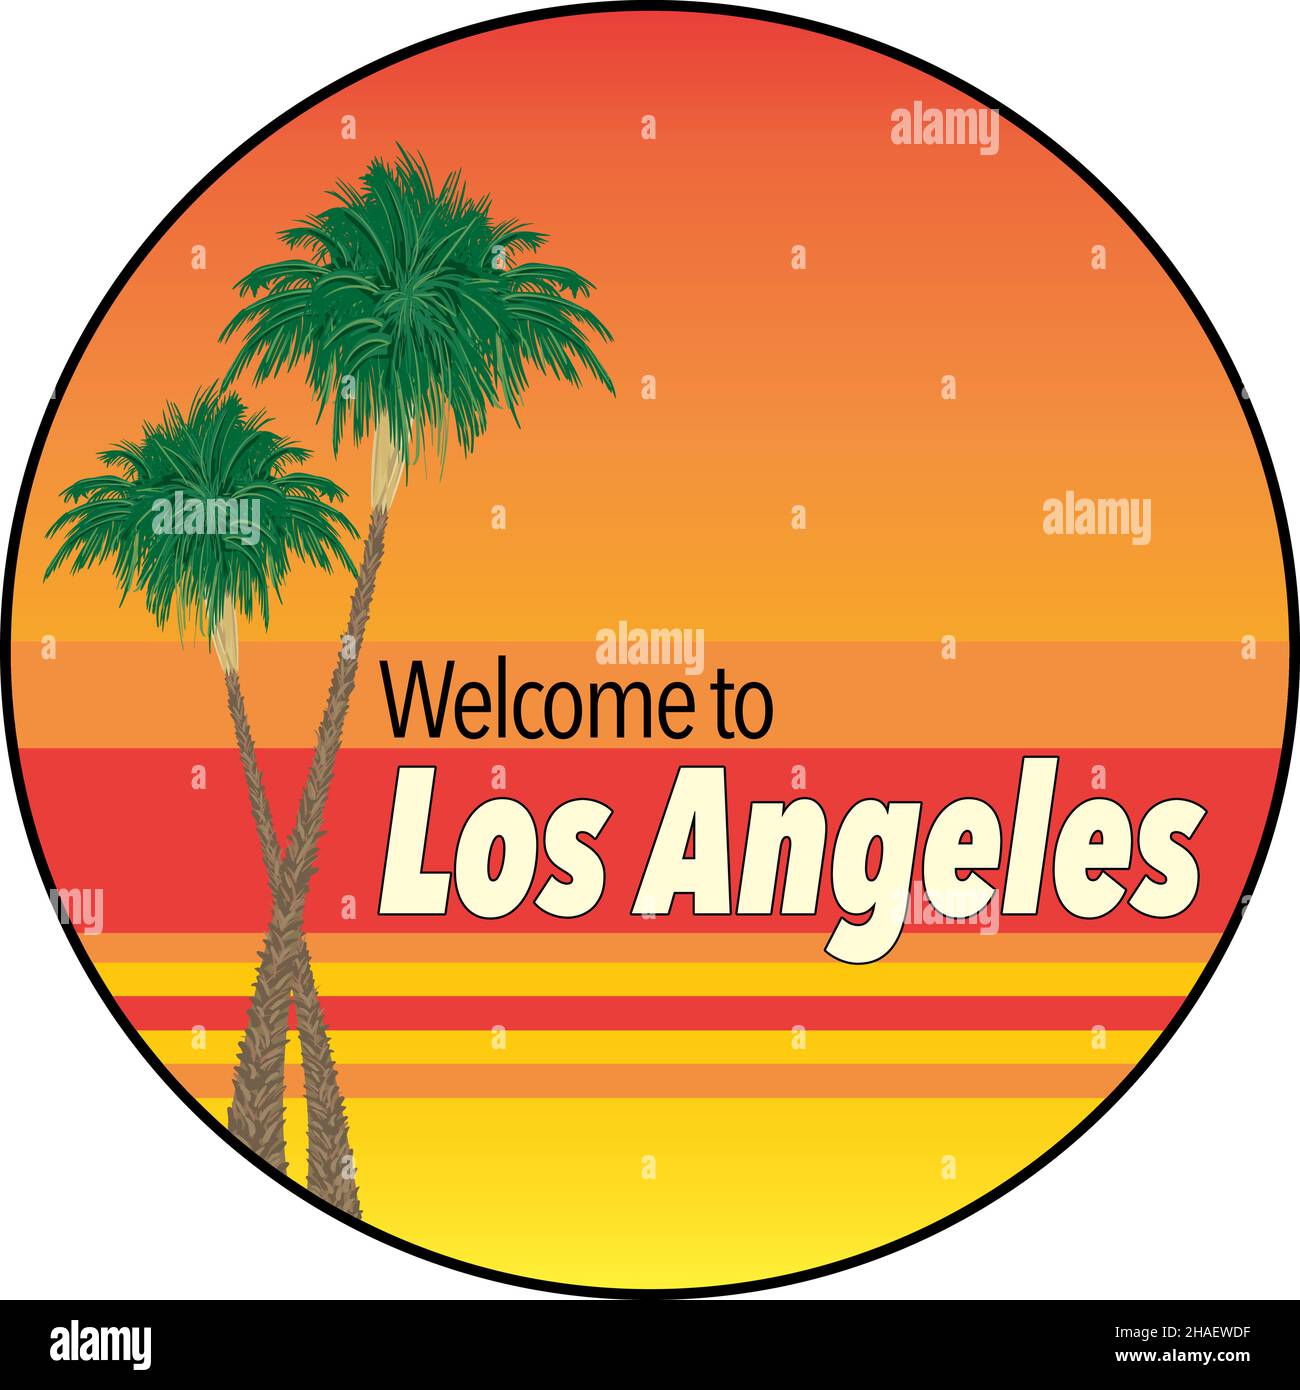 Welcome to Los Angeles design with palm trees and sunset colors - Vector Illustration Stock Vector